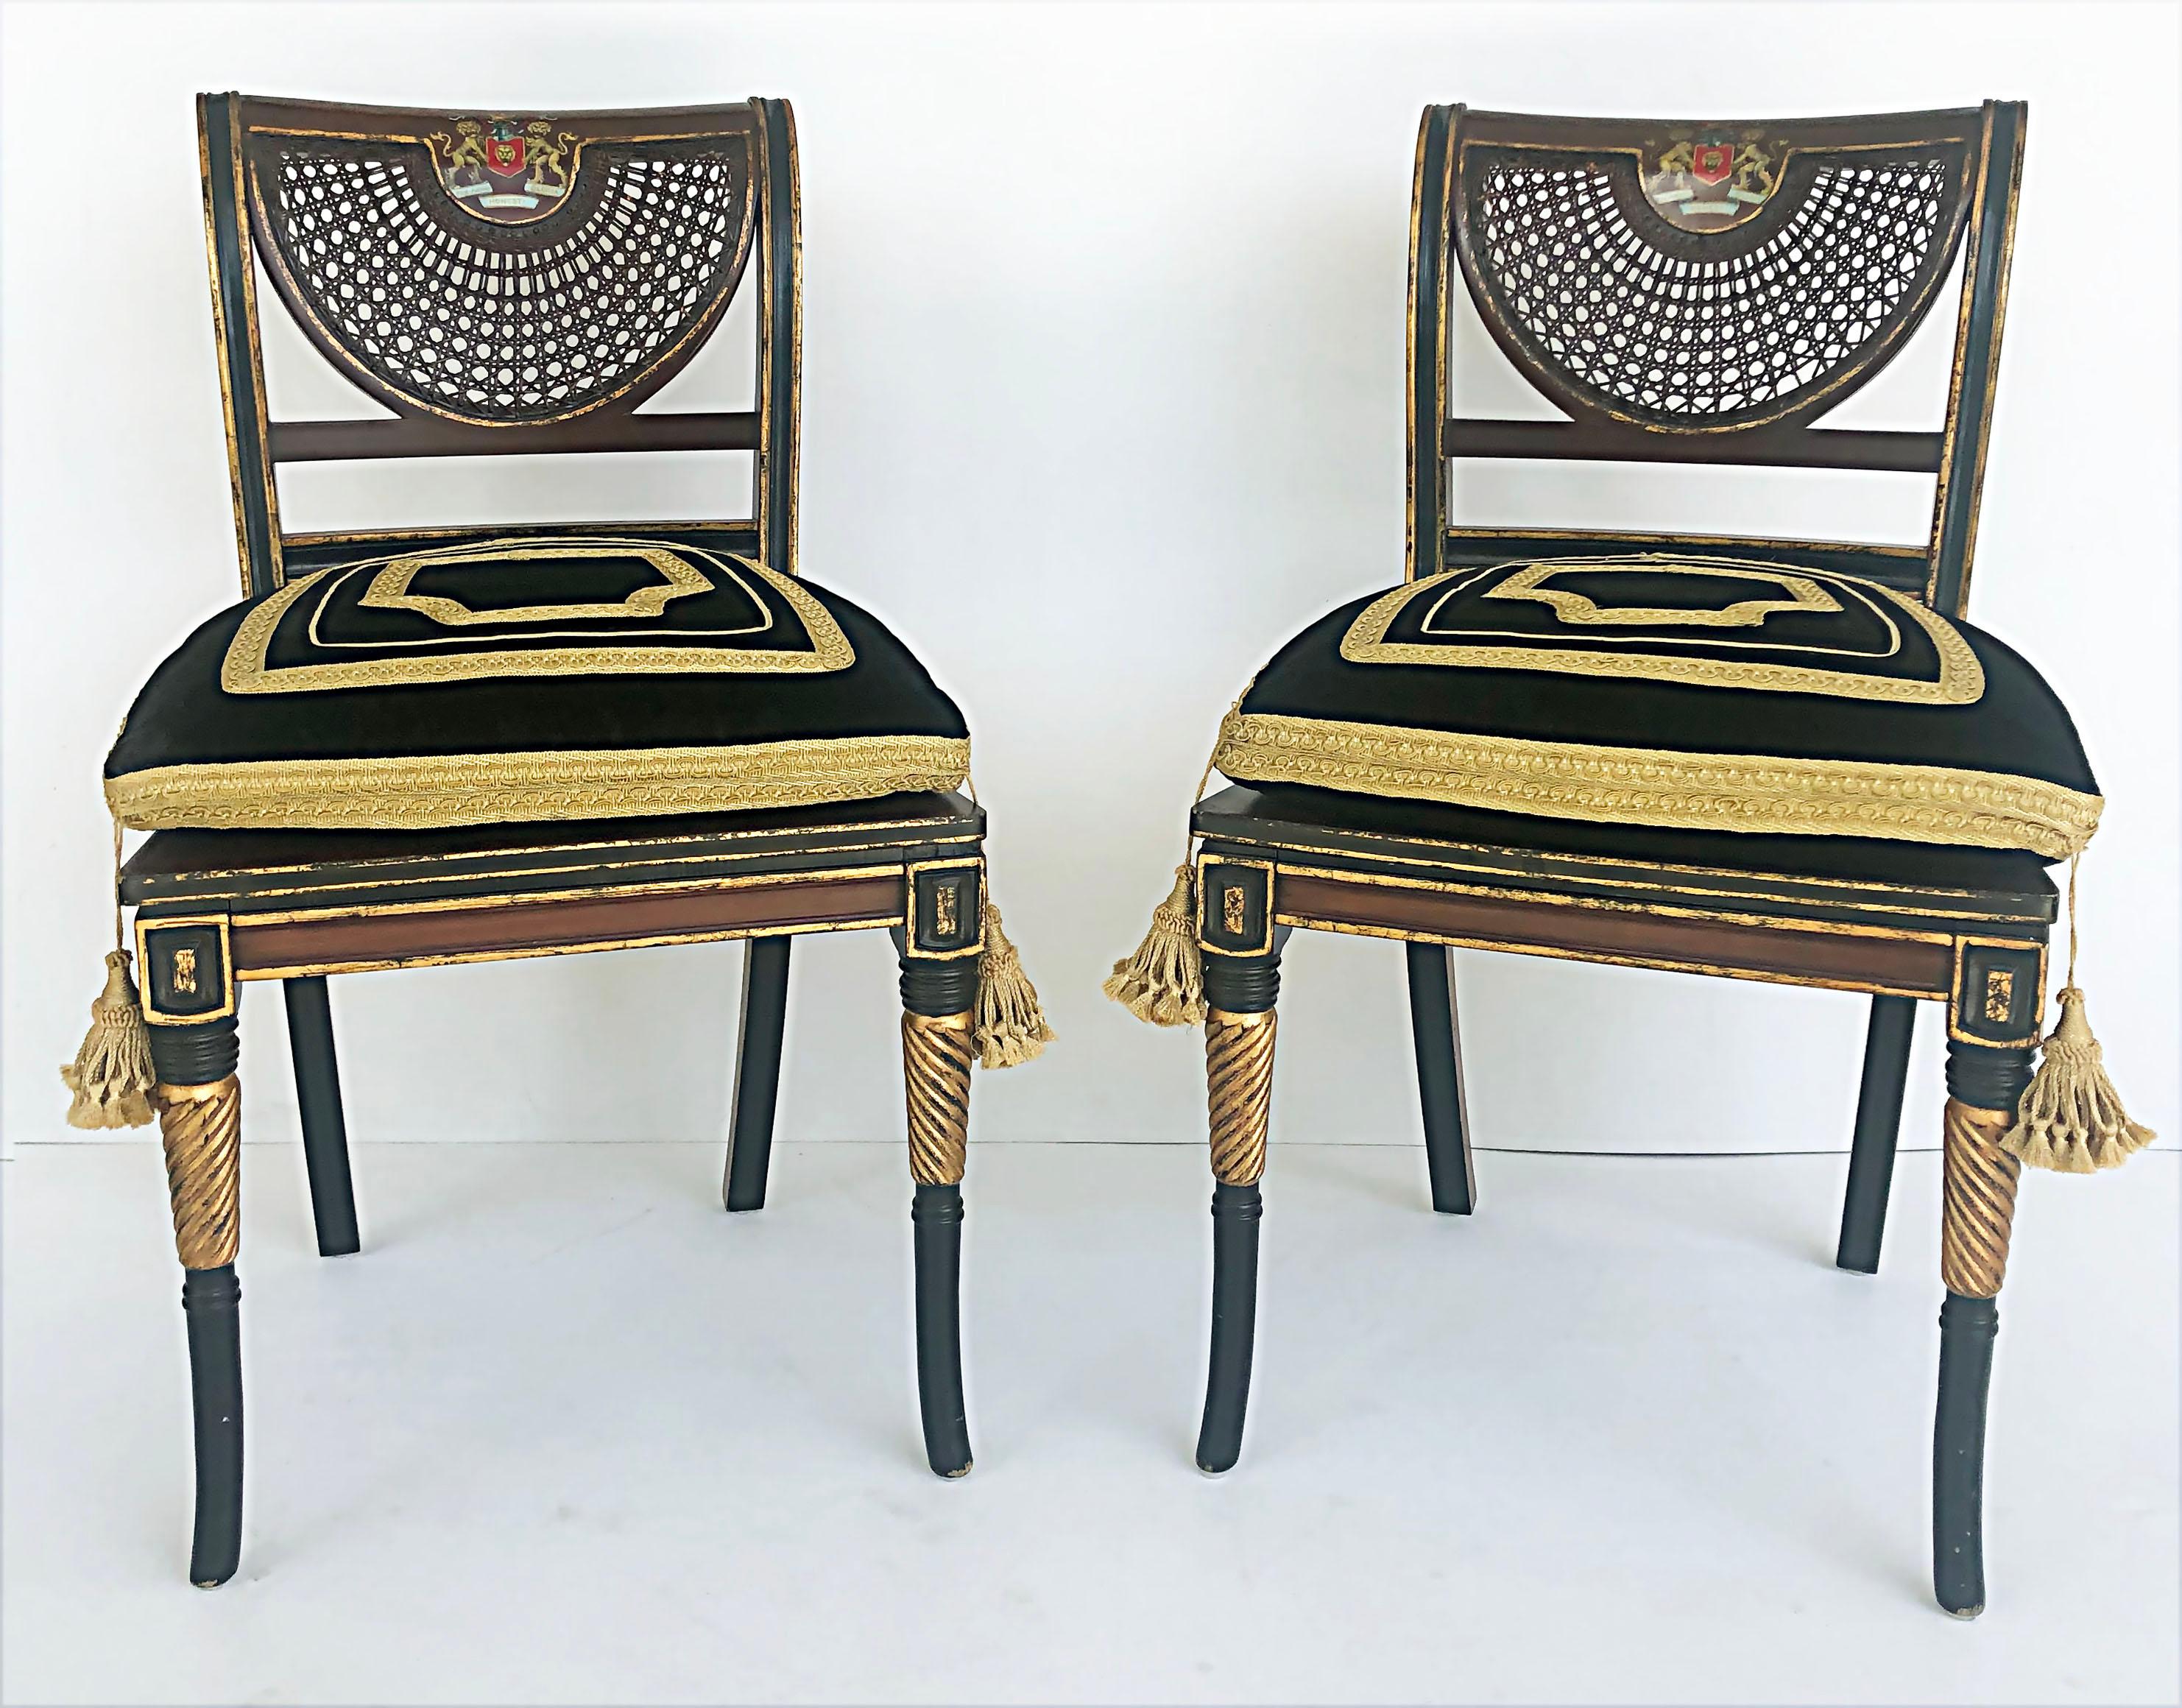 Clive Christian Regency style hand-painted caned chairs with coat of arms, pair

Offered for sale is a pair of Clive Christian Regency-style hand-painted caned chairs. This highly stylized parcel gilt pair of chairs has a fan-shaped caned detail